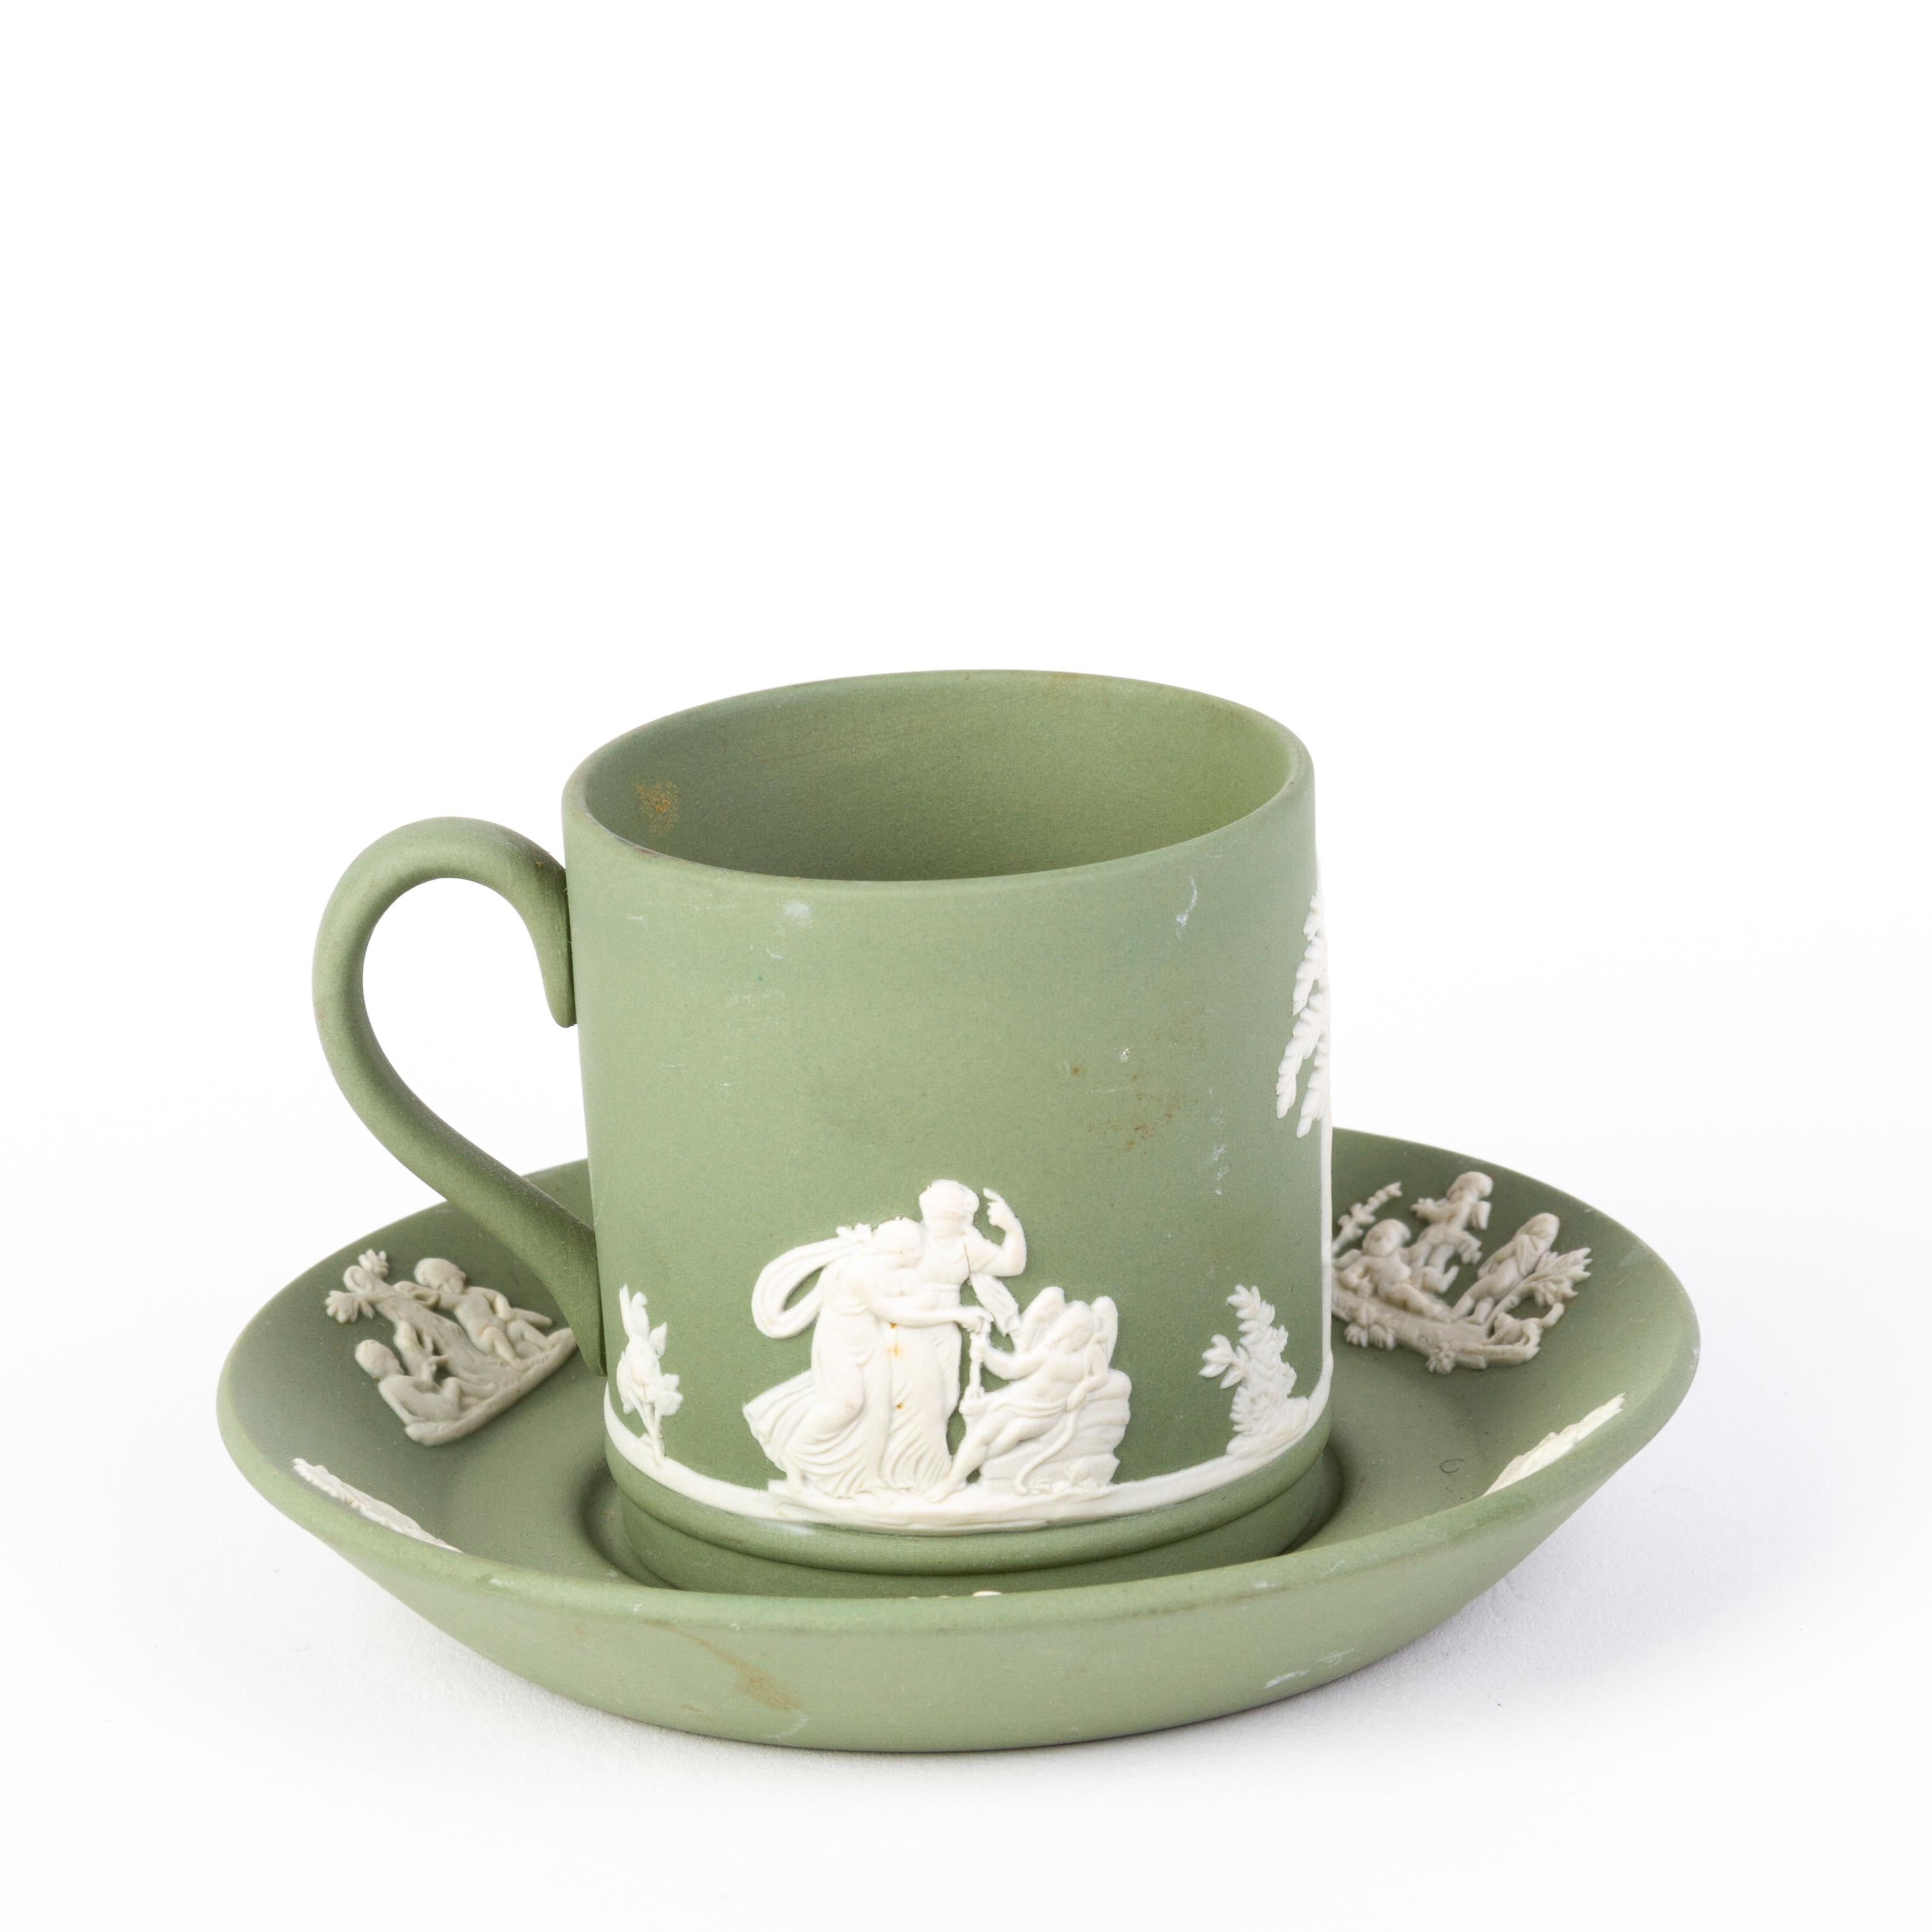 Wedgwood Green Jasperware Neoclassical Cameo Cup & Saucer
Good condition
From a private collection
Free international shipping.